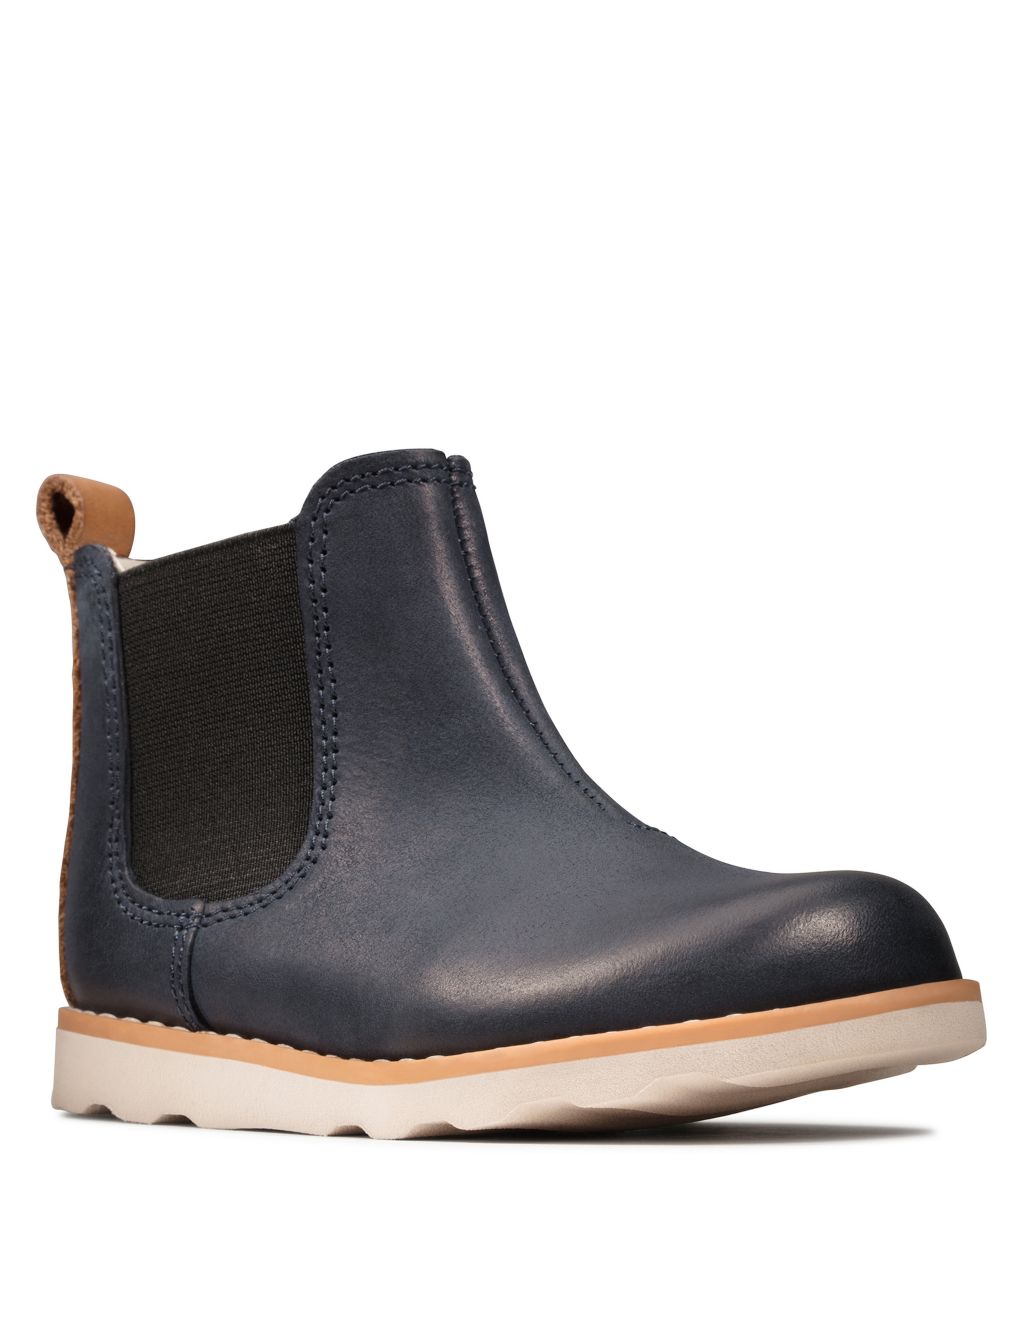 Baby Leather Chelsea Boots image 1